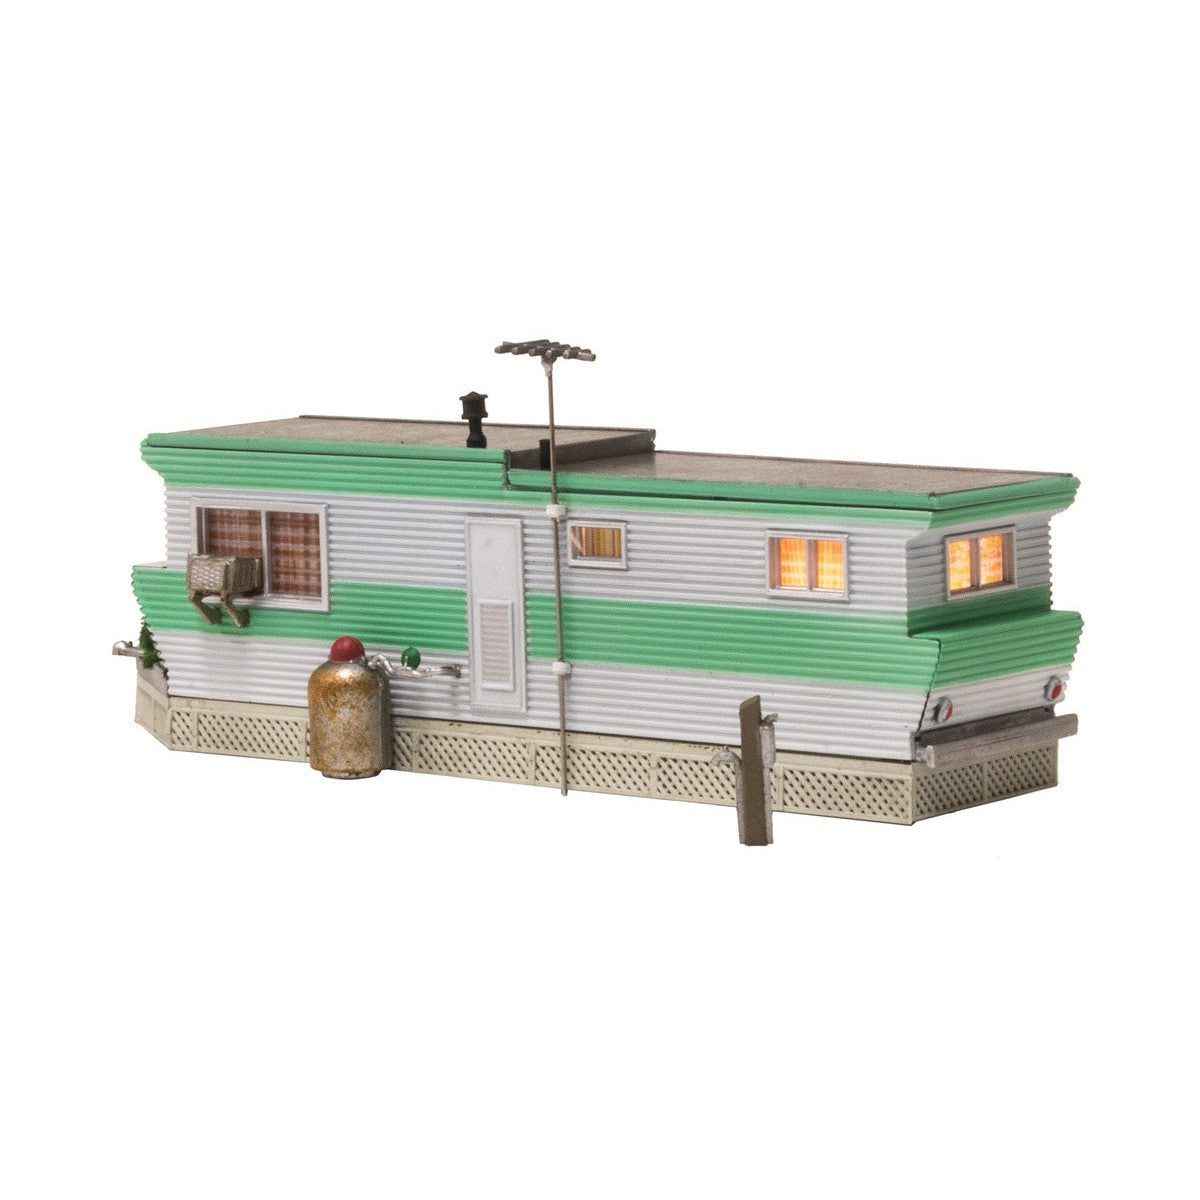 Woodland Scenics N Scale Grillin’ & Chillin’ Trailer Built and Ready